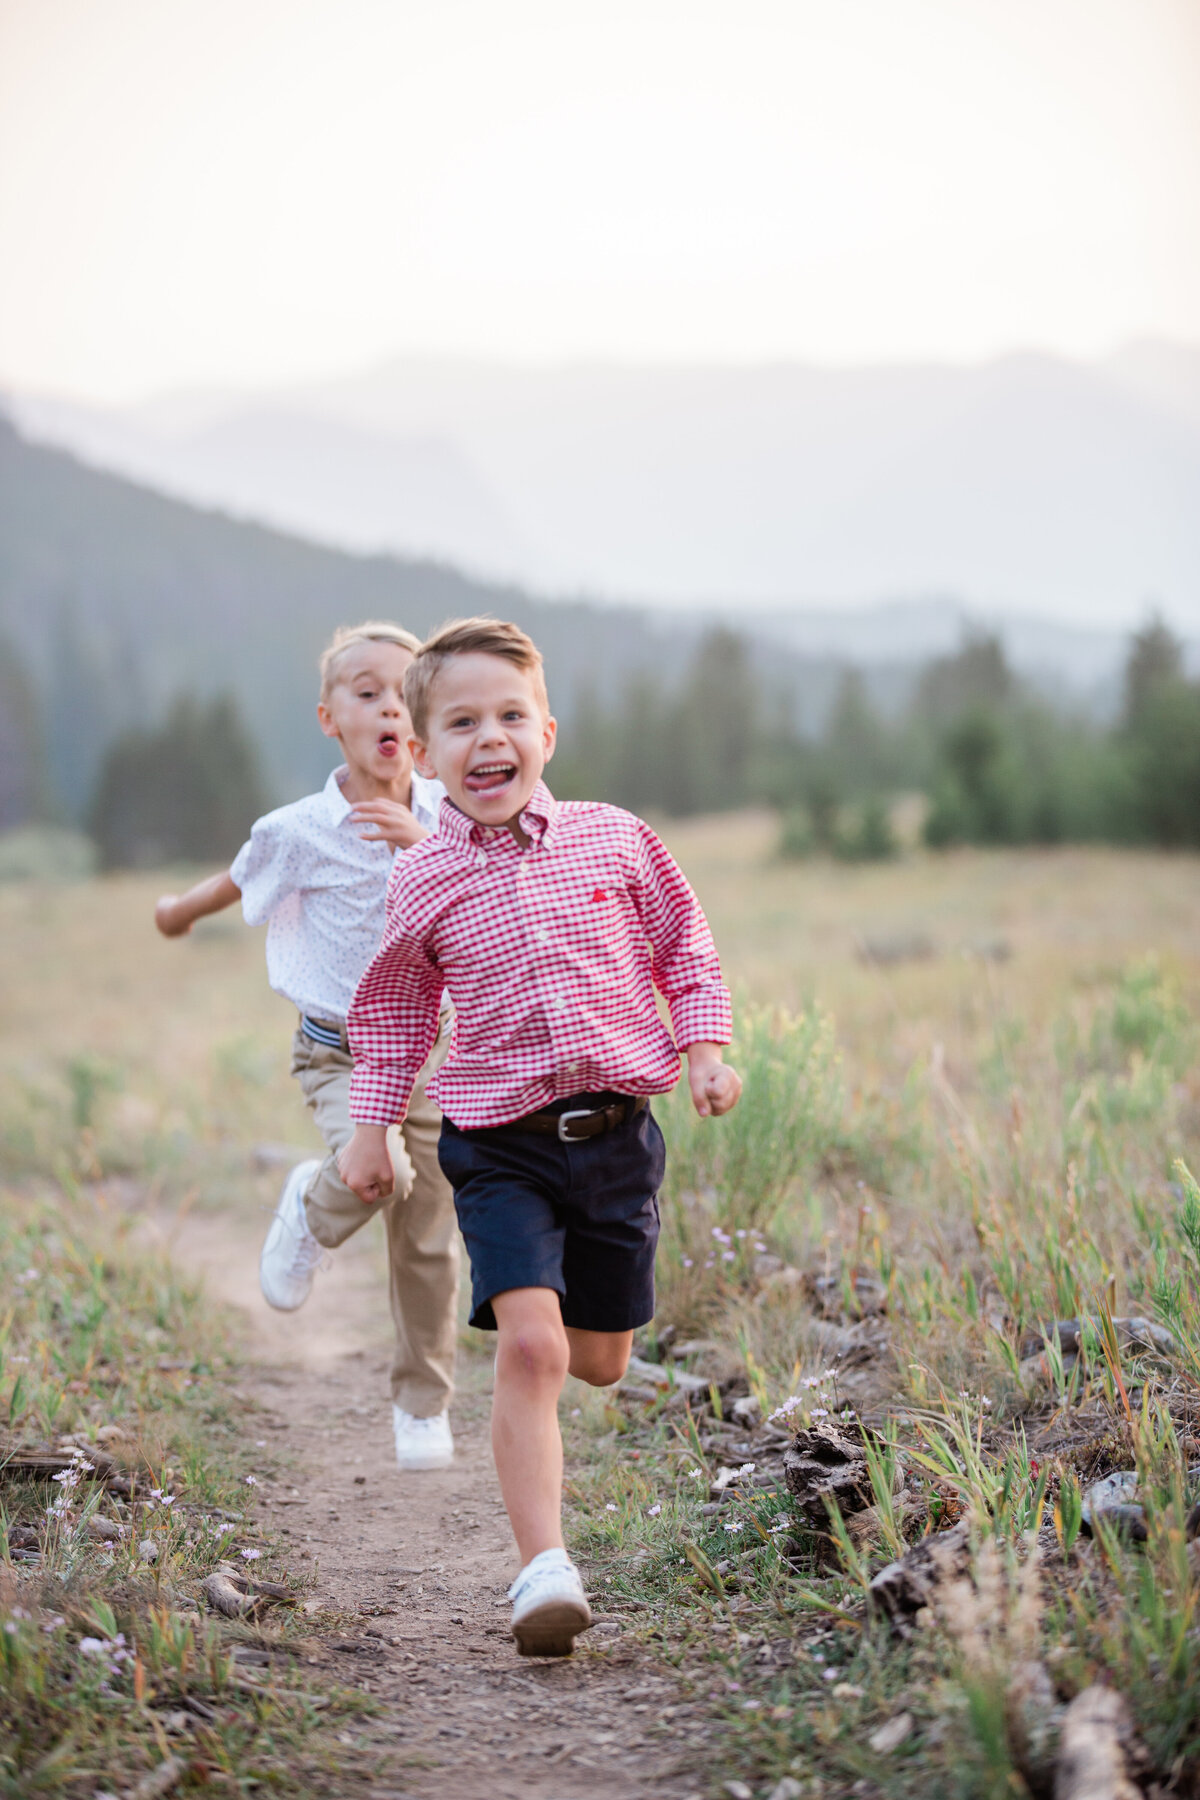 Two young boys race playfully through a field with mountains in the distance